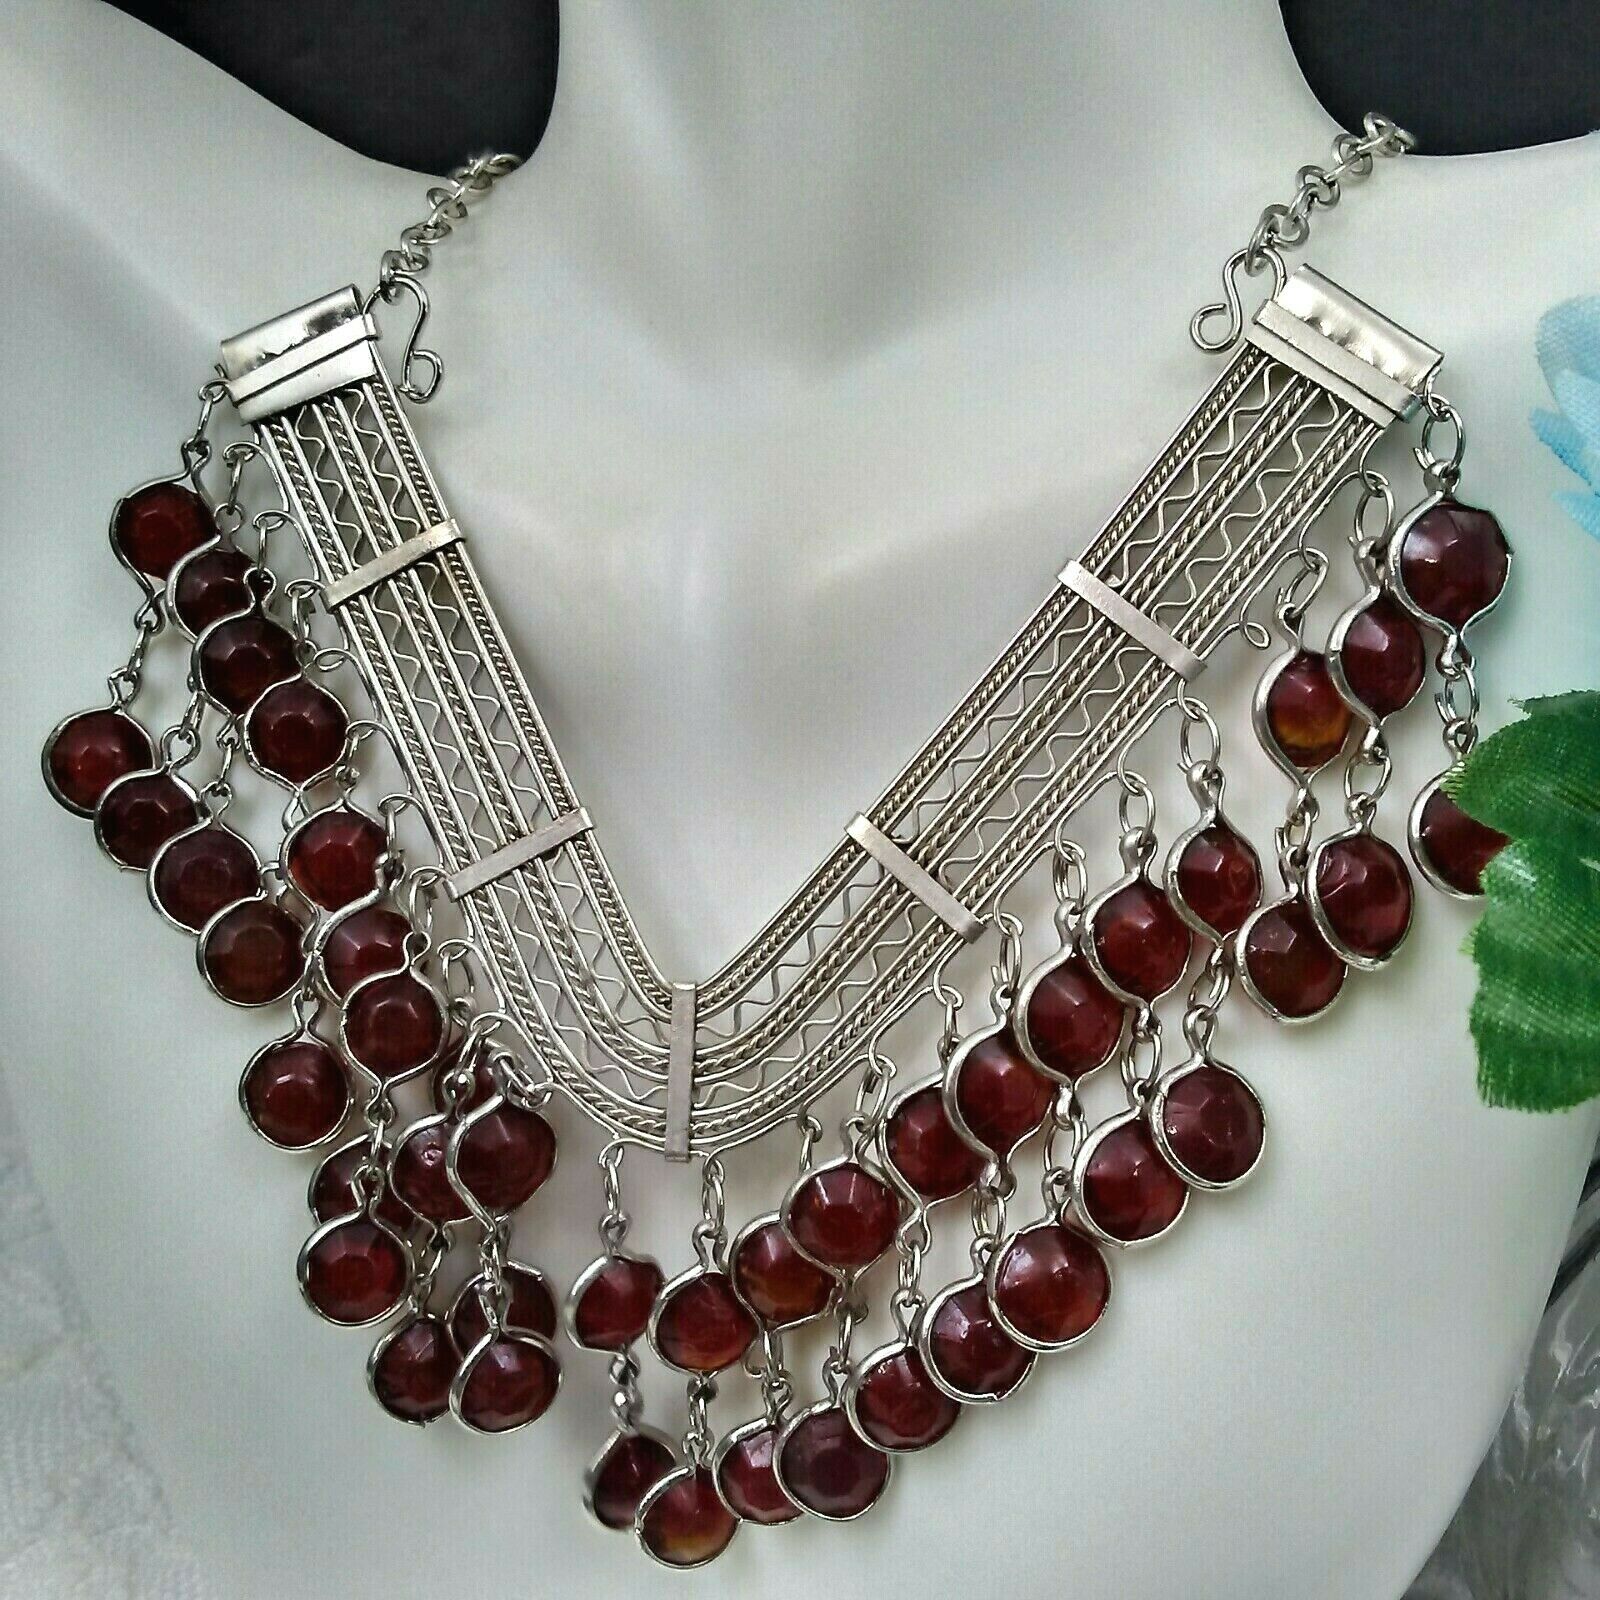 Estate Sale: Silver Tone Necklace With Red Glass Gems 14.5" #18-9